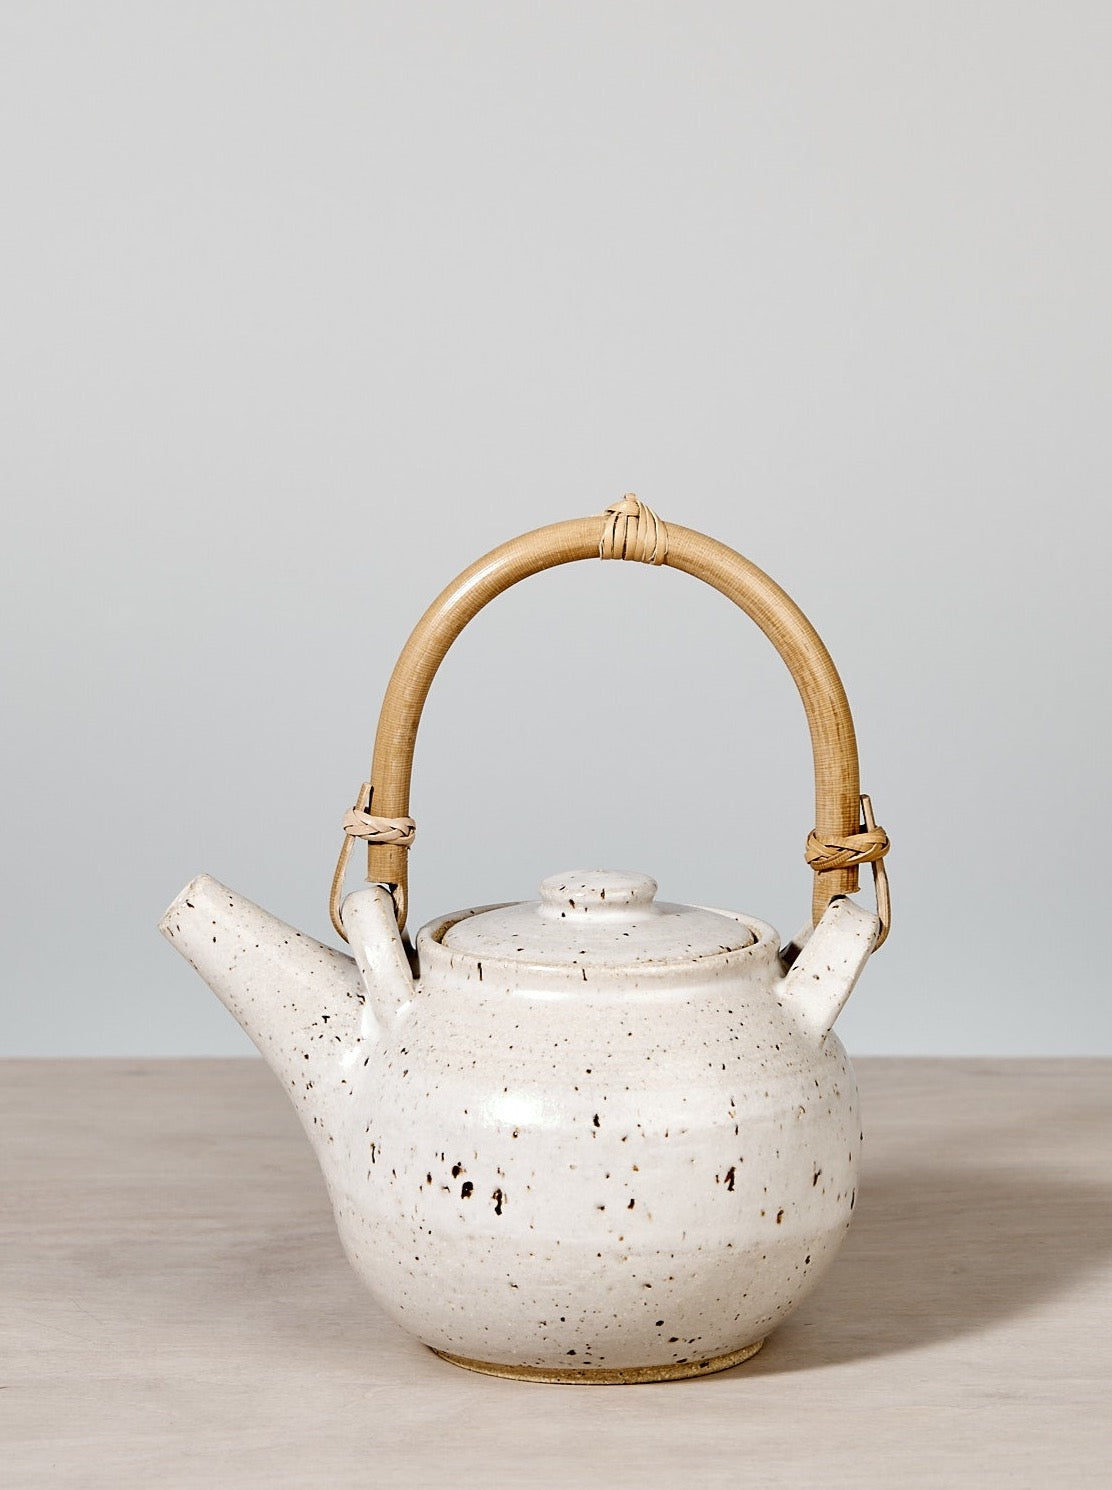 A Nicola Shuttleworth tea pot – speckled with Bamboo handle, on a wooden table.